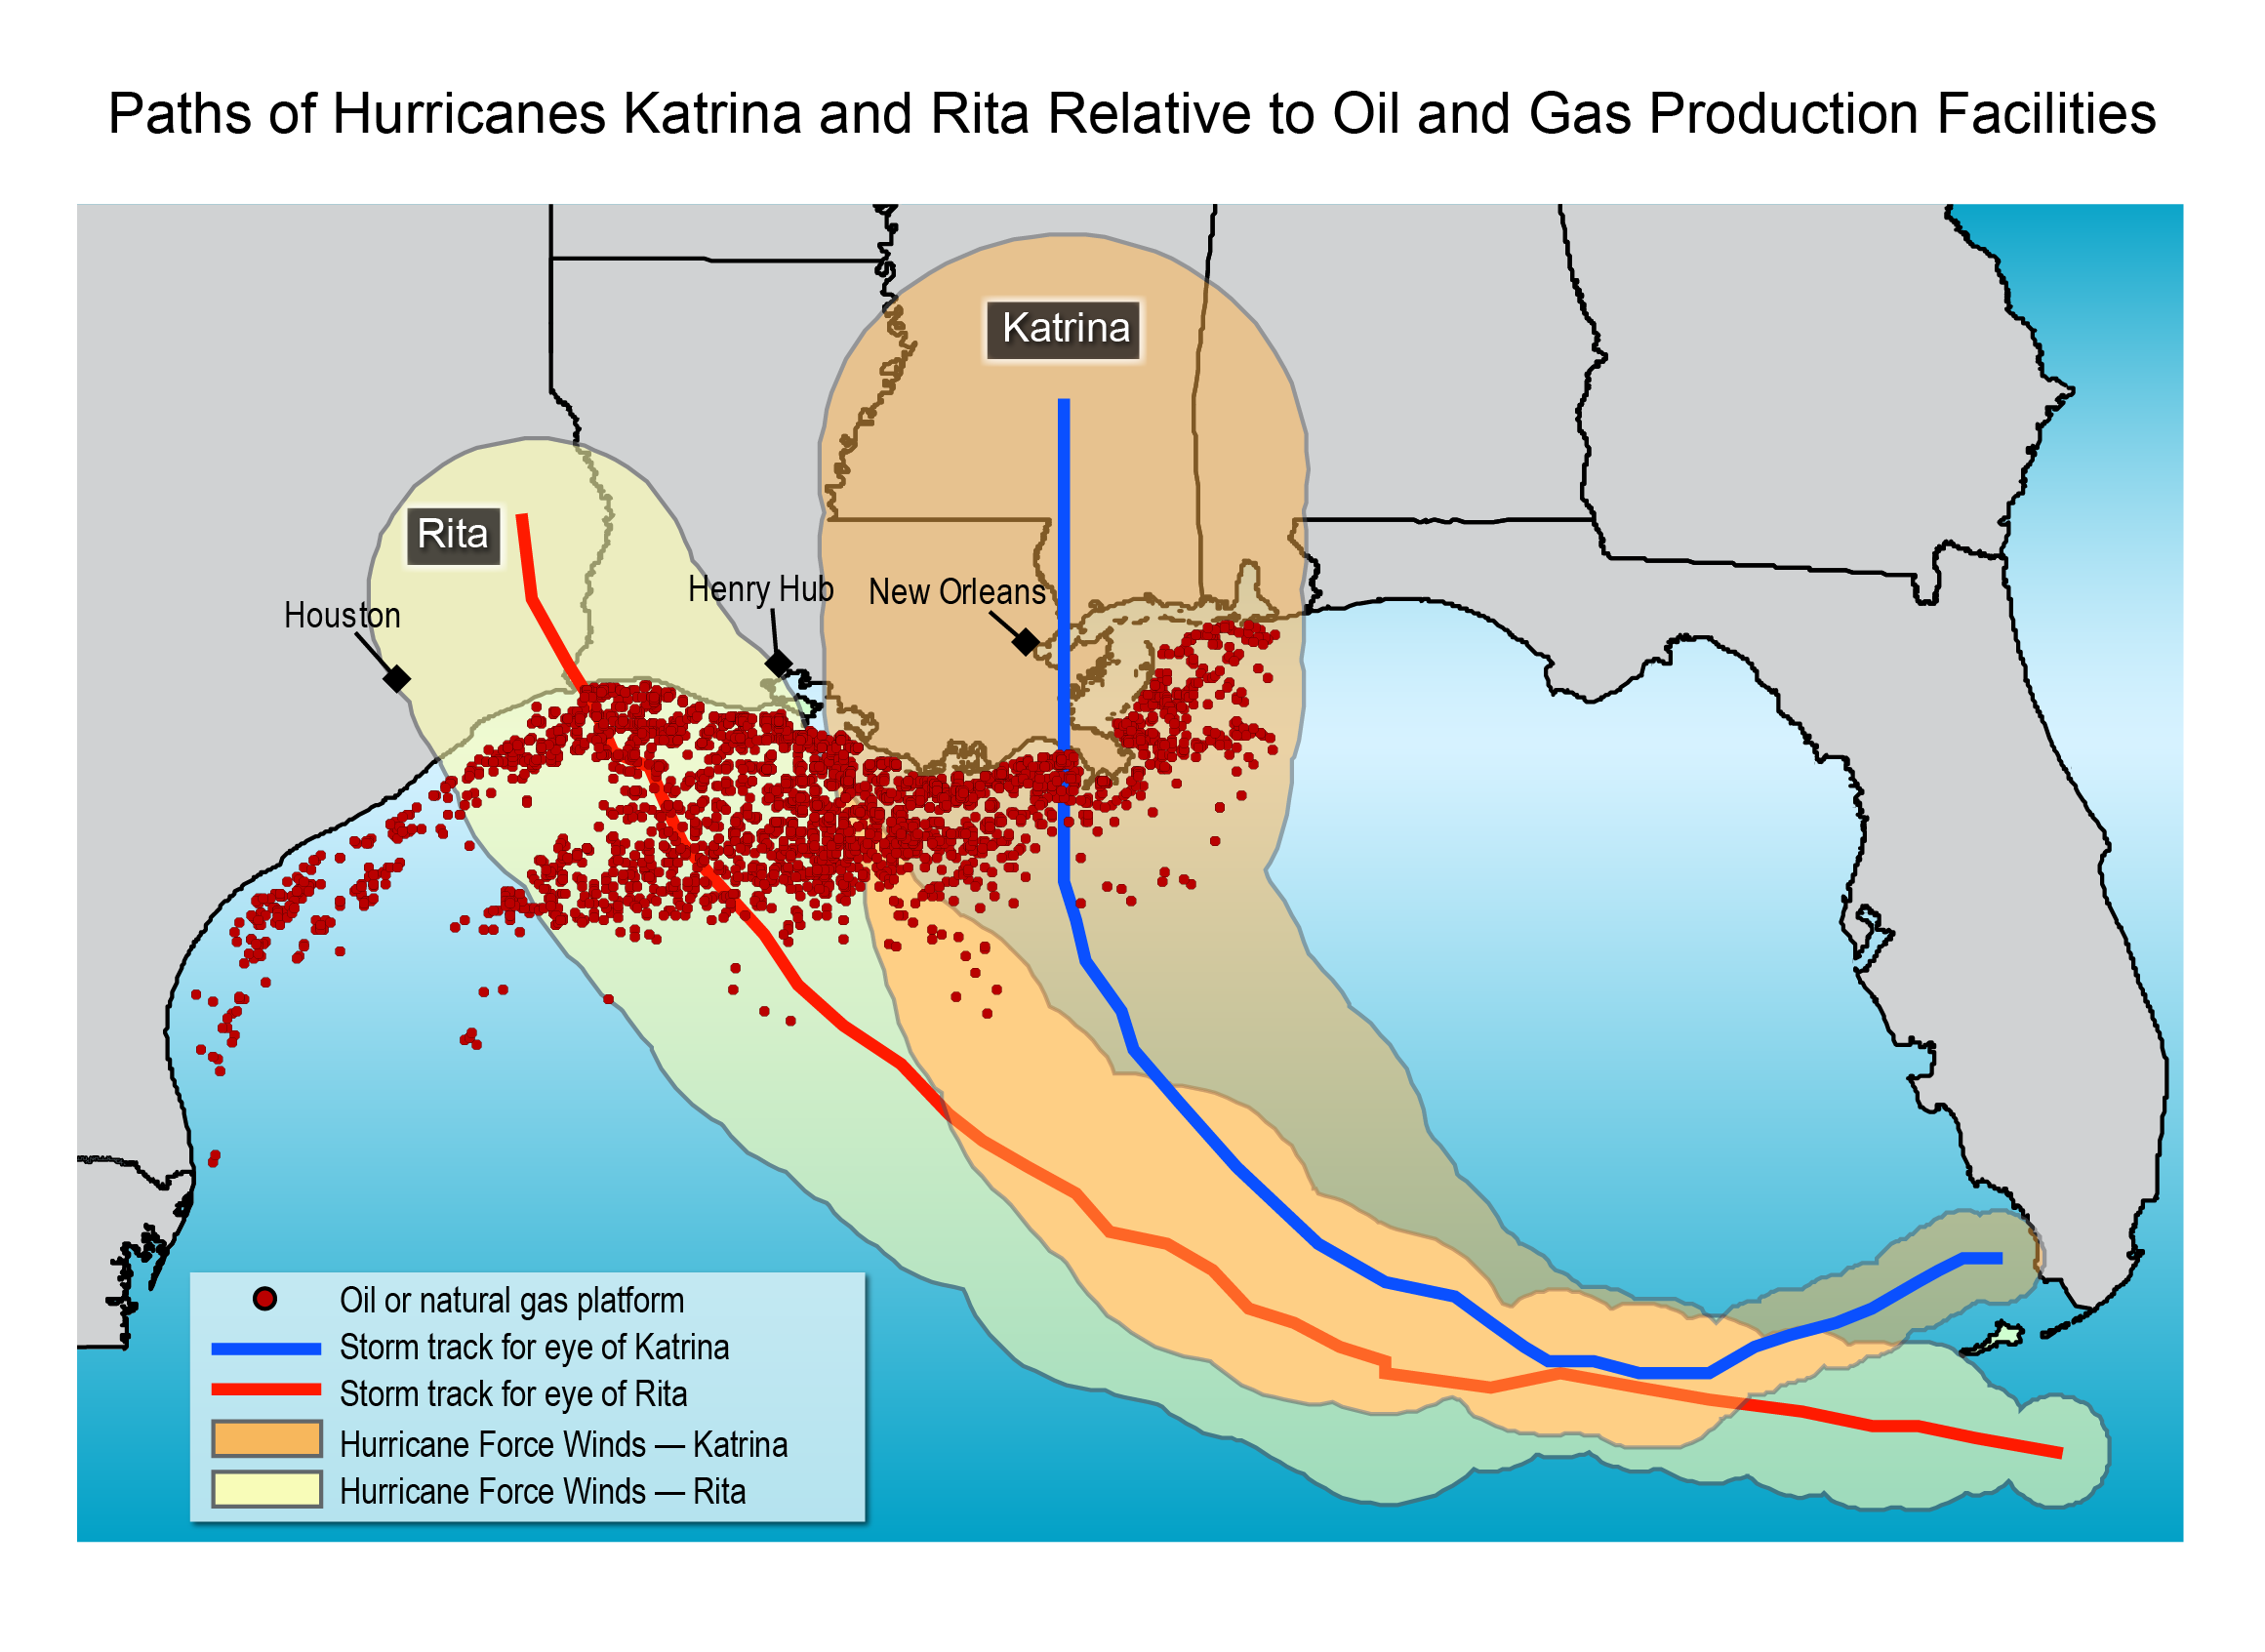 Paths of Hurricanes Katrina and Rita Relative to Oil and Gas Production Facilities